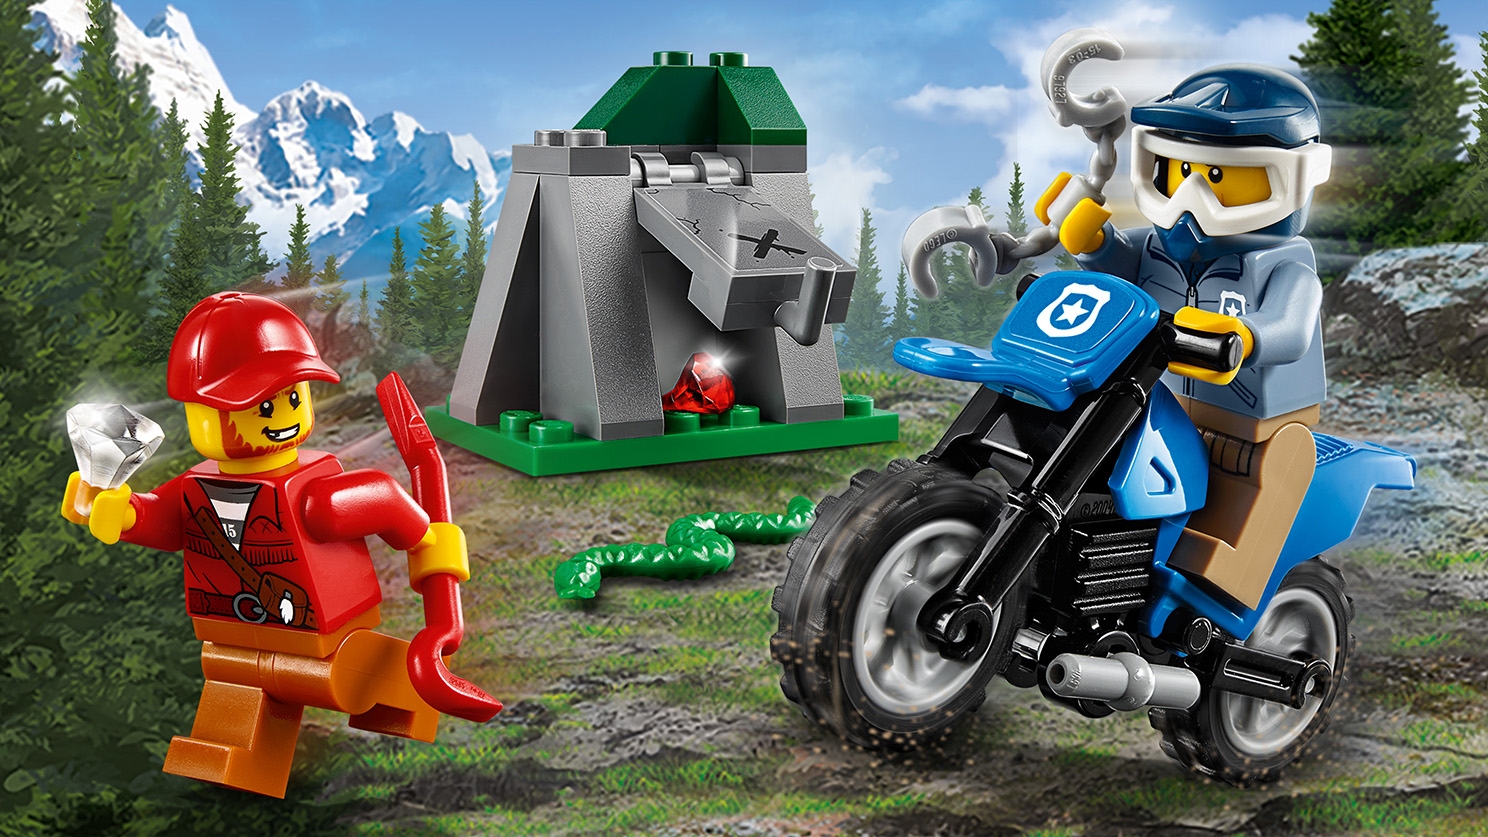 LEGO City Mountain Police - 60170 Off-Road Chase - The police jumps on their Off-Road motorbike to chase a diamond thief in the mountains.